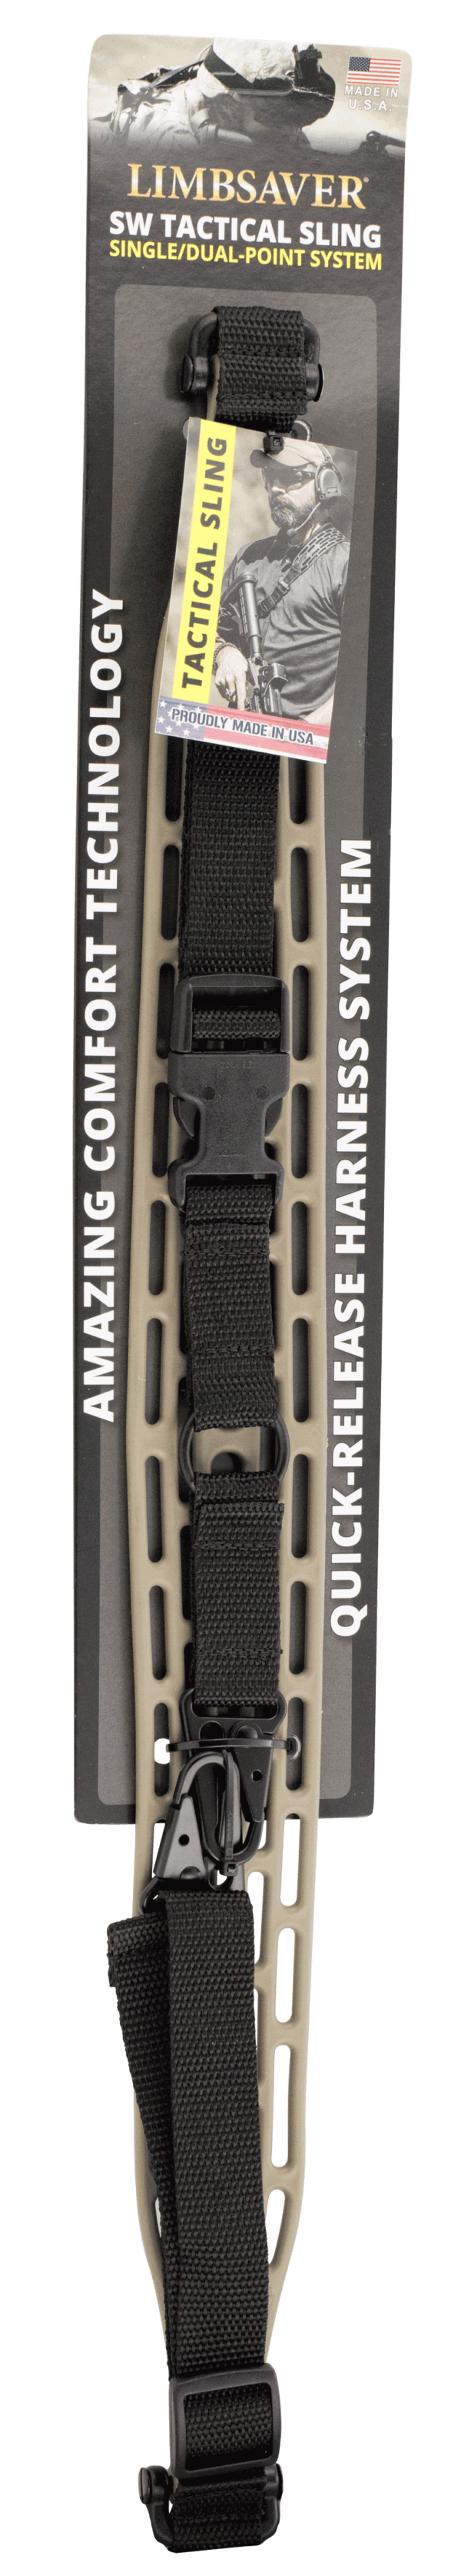 Limbsaver 12140 Tactical Sling made of Tan with Black Strap Nylon 48″ OAL 1″ W & Adjustable One-Two Point Design for Rifle/Shotgun